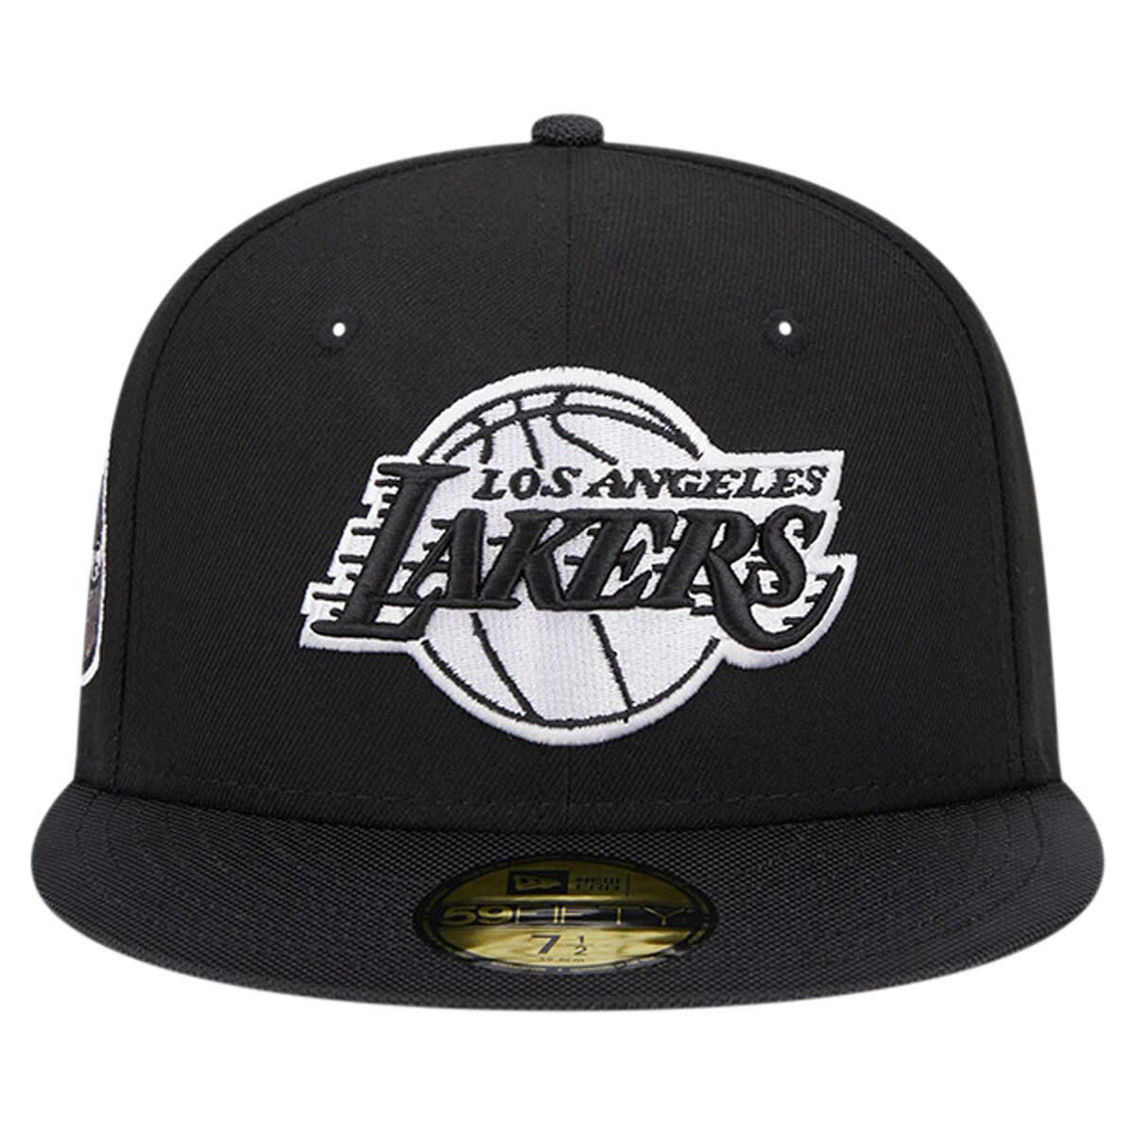 New Era Men's Black Los Angeles Lakers Active Satin Visor 59FIFTY Fitted Hat - Image 3 of 4